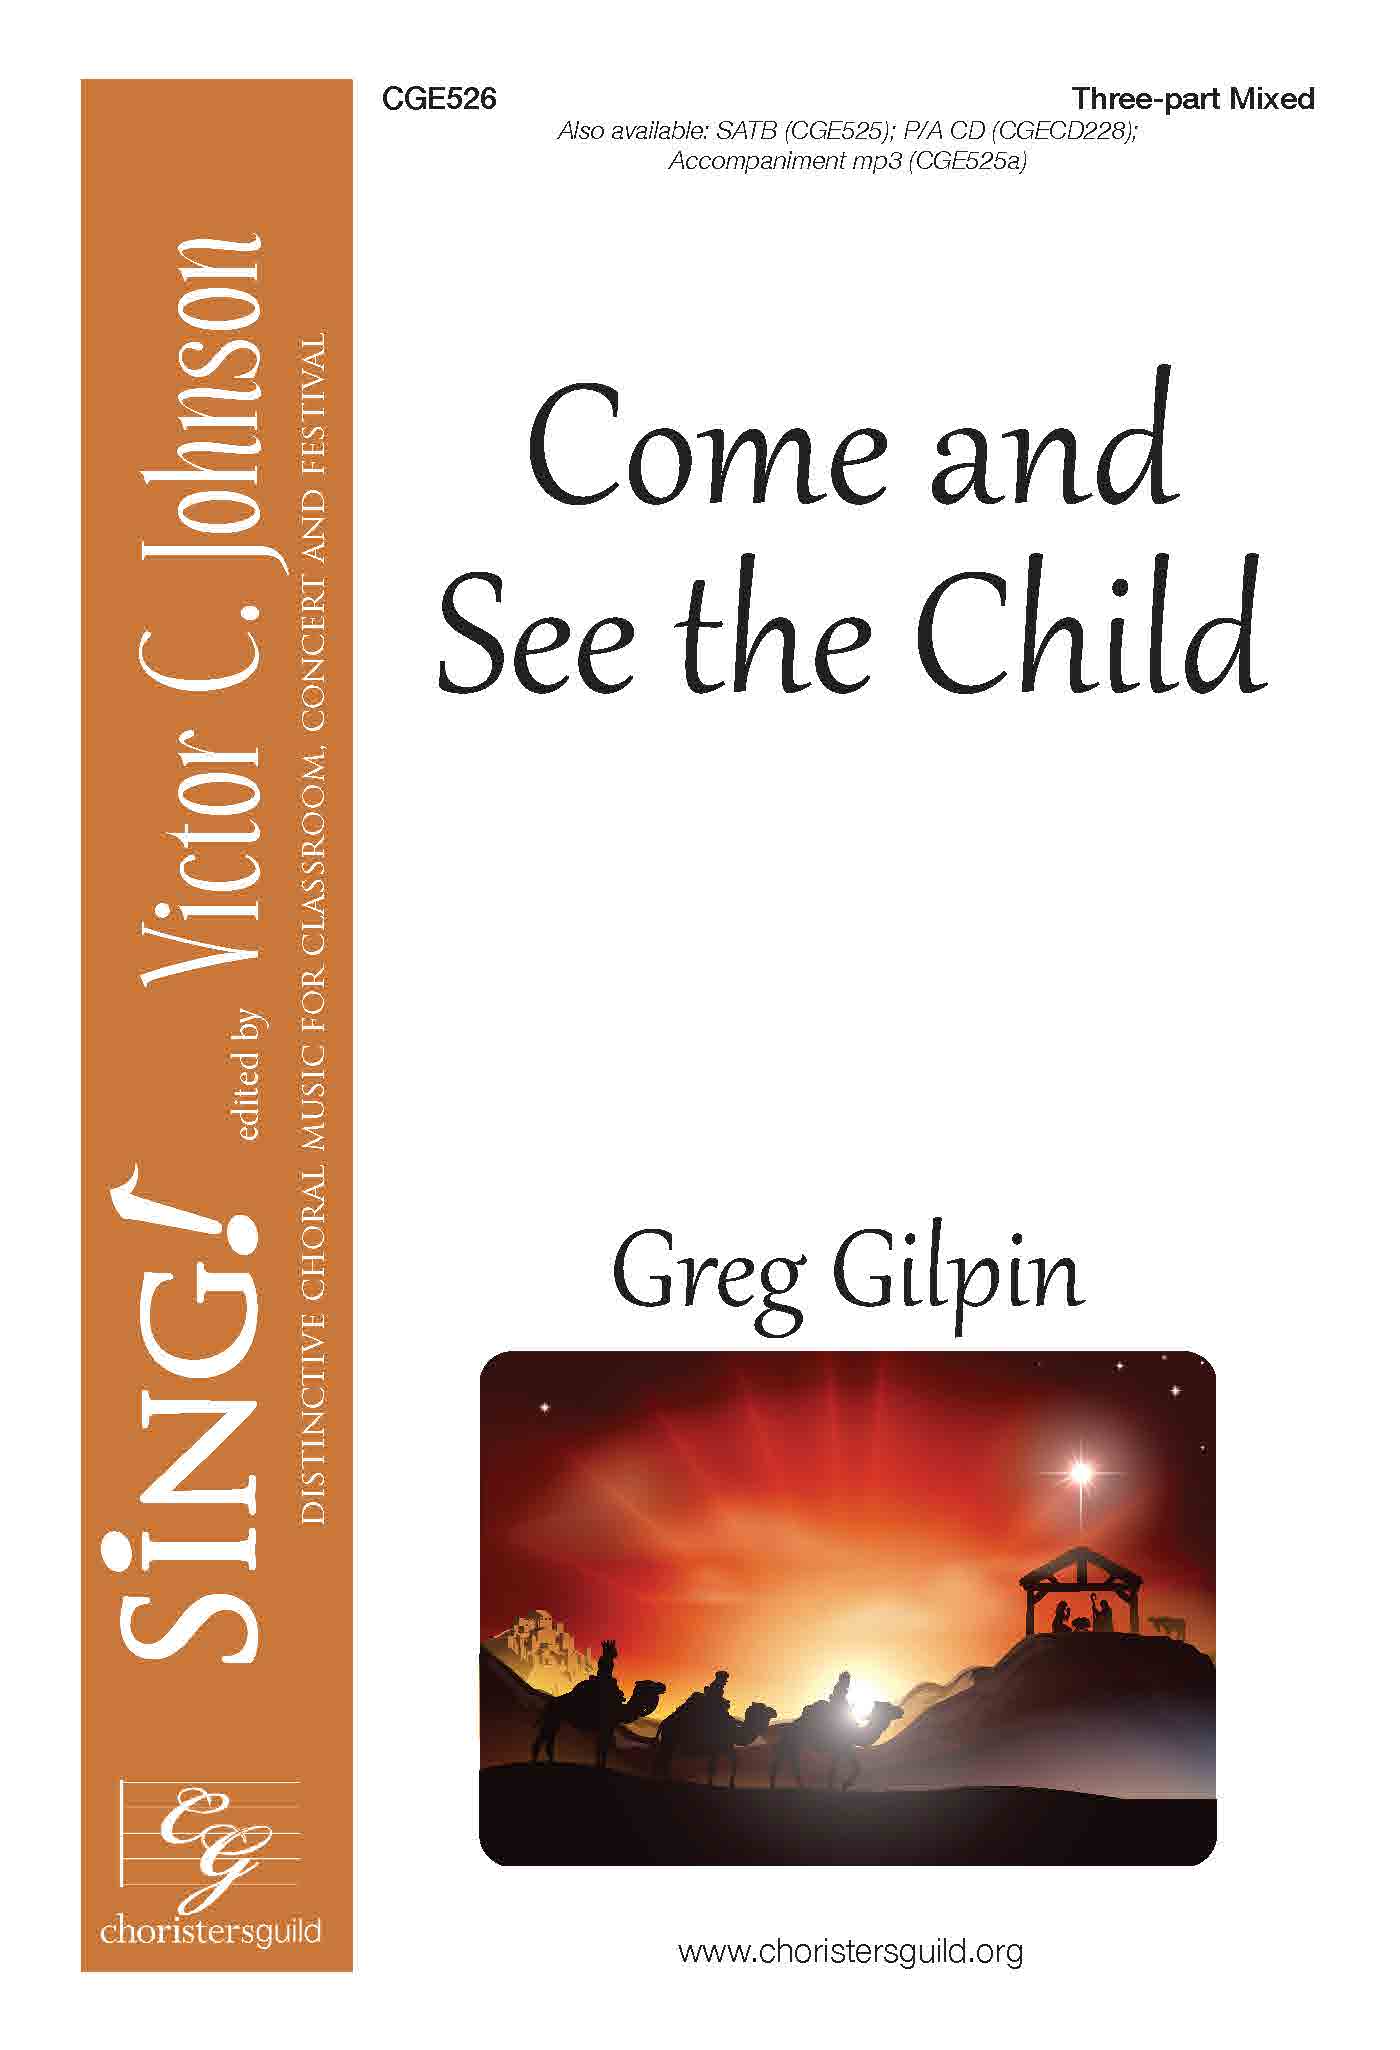 Come and See the Child- Three-part Mixed Come and See the Child - Three